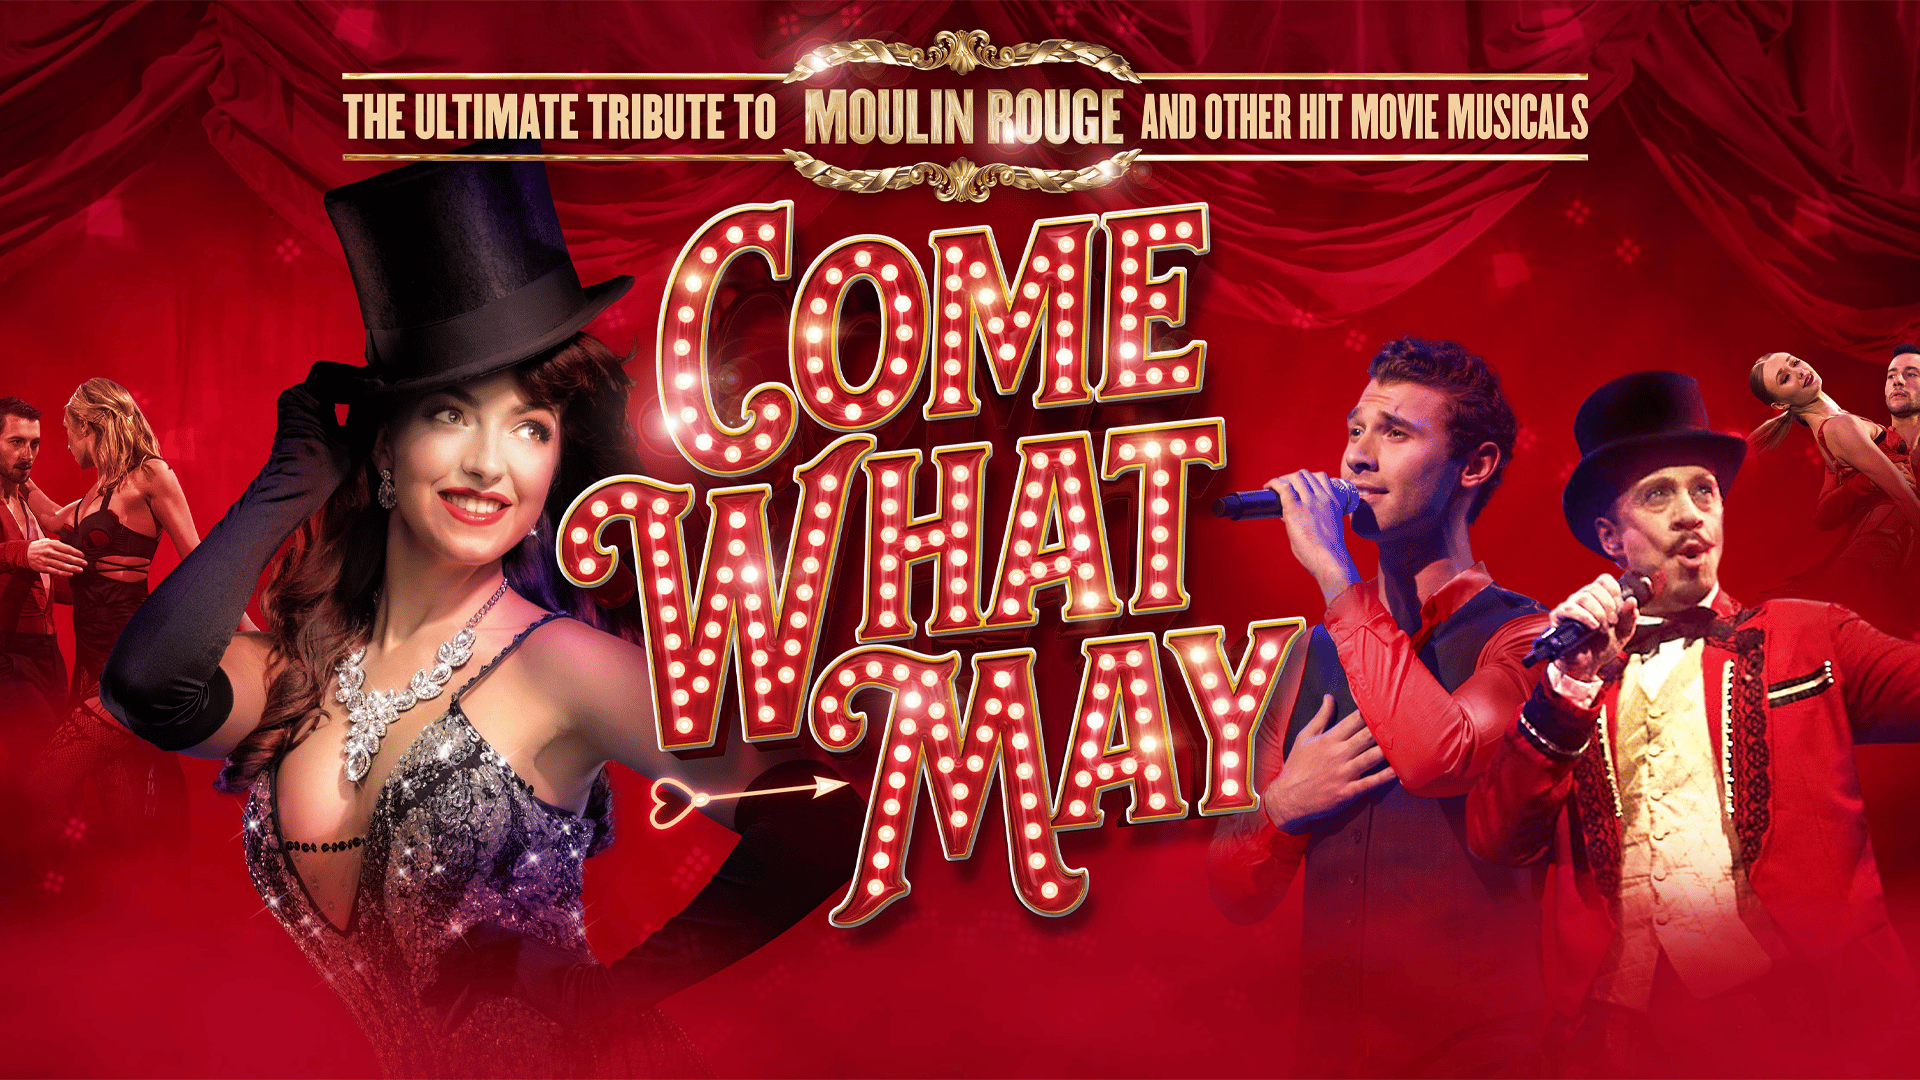 Come What May artwork - Glamorously dressed performers against a red backdrop. Text on the top banner reads: The ultimate tribute to Moulin Rouge and other hit movie musicals.